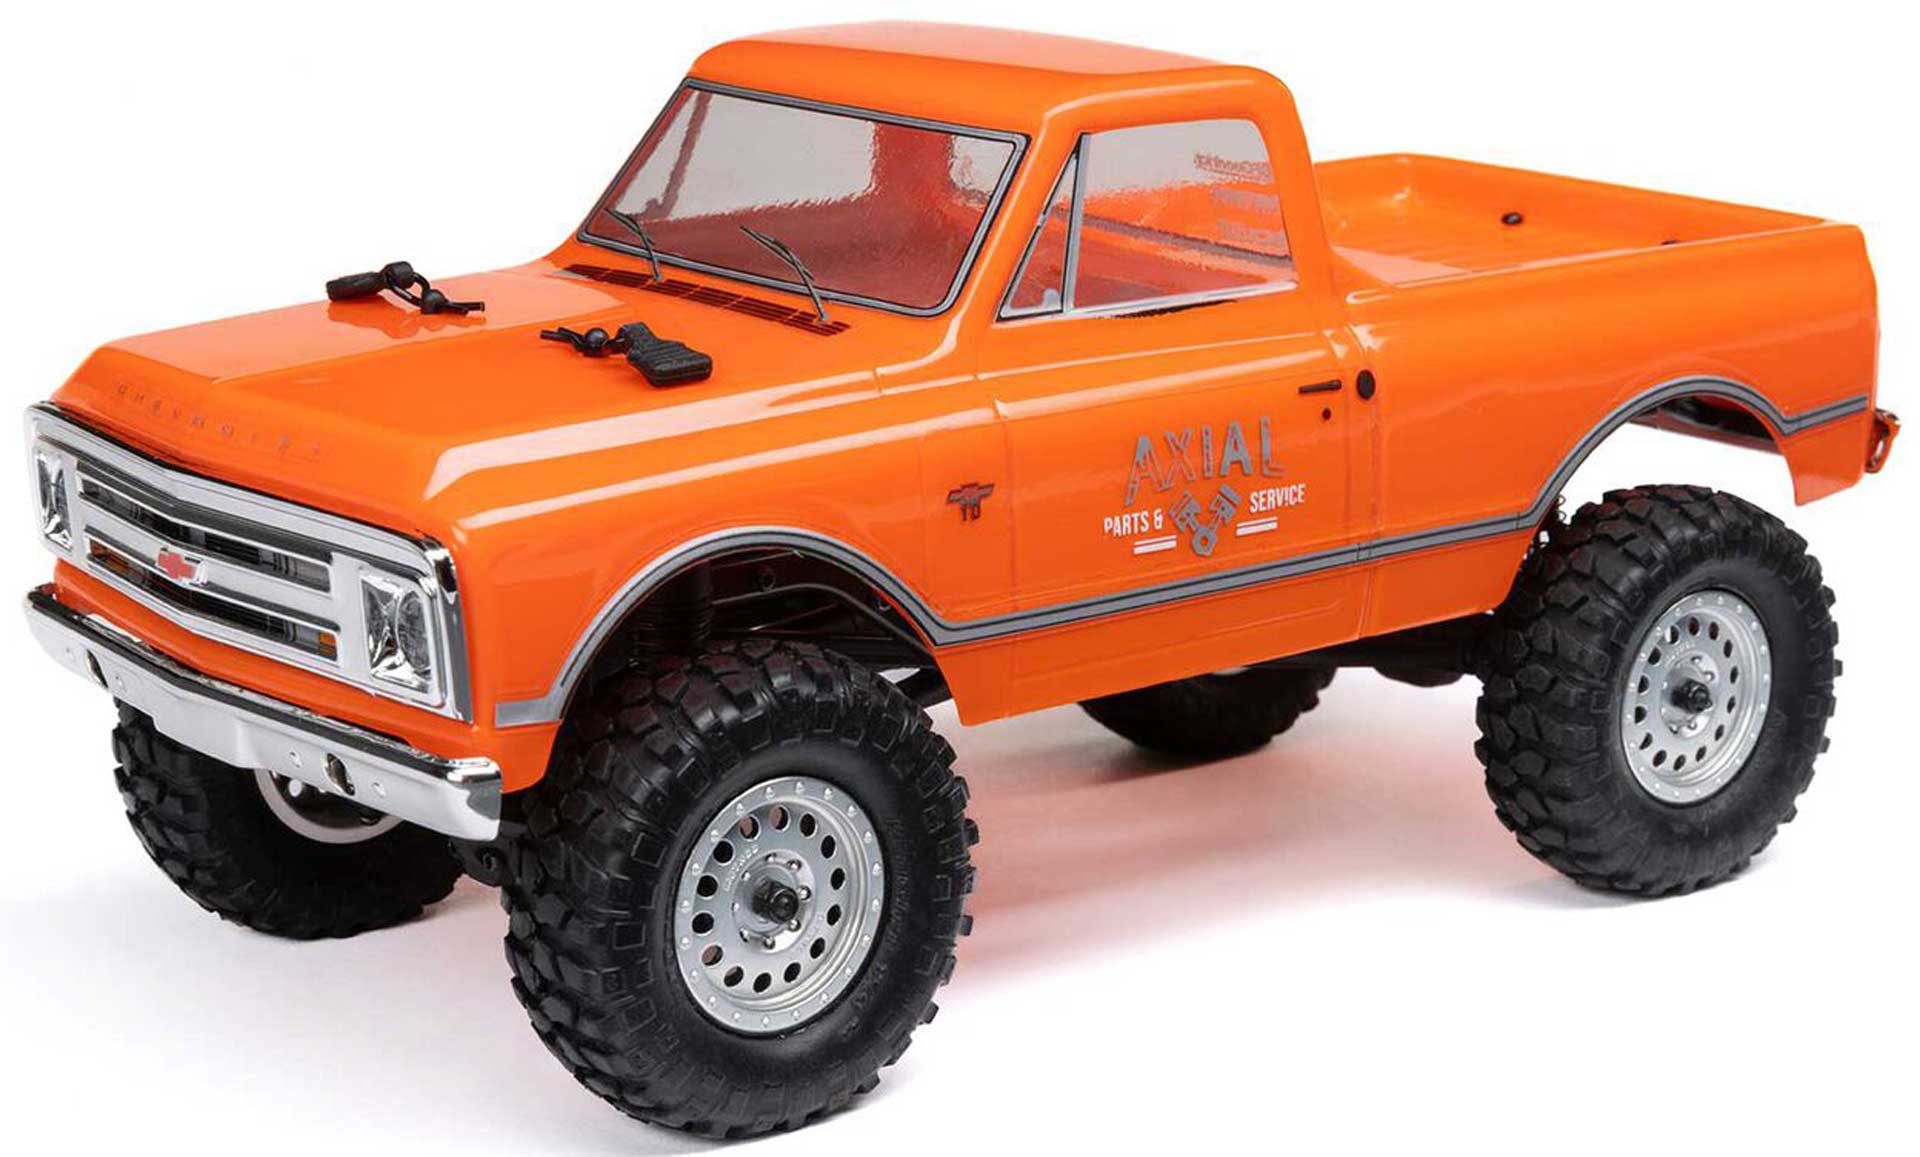 AXIAL SCX24 1967 Chevrolet C10 1/24 4WD Brushed Truck RTR Orange